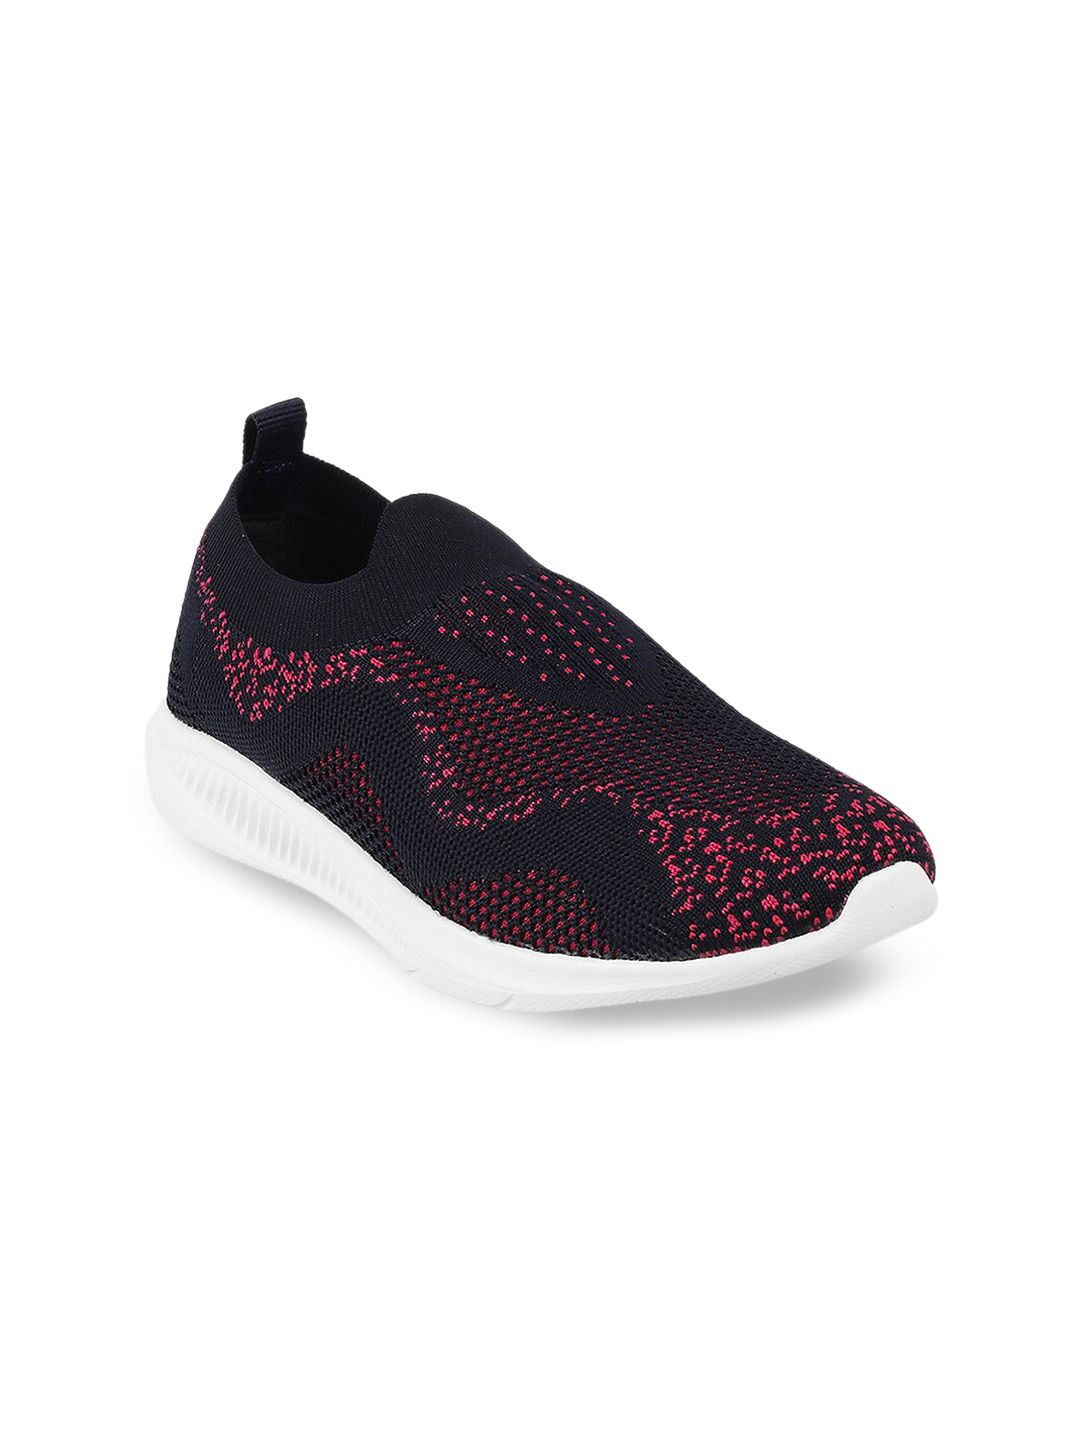 ACTIV Women Black & Pink Synthetic Slip-On Sneakers Price in India